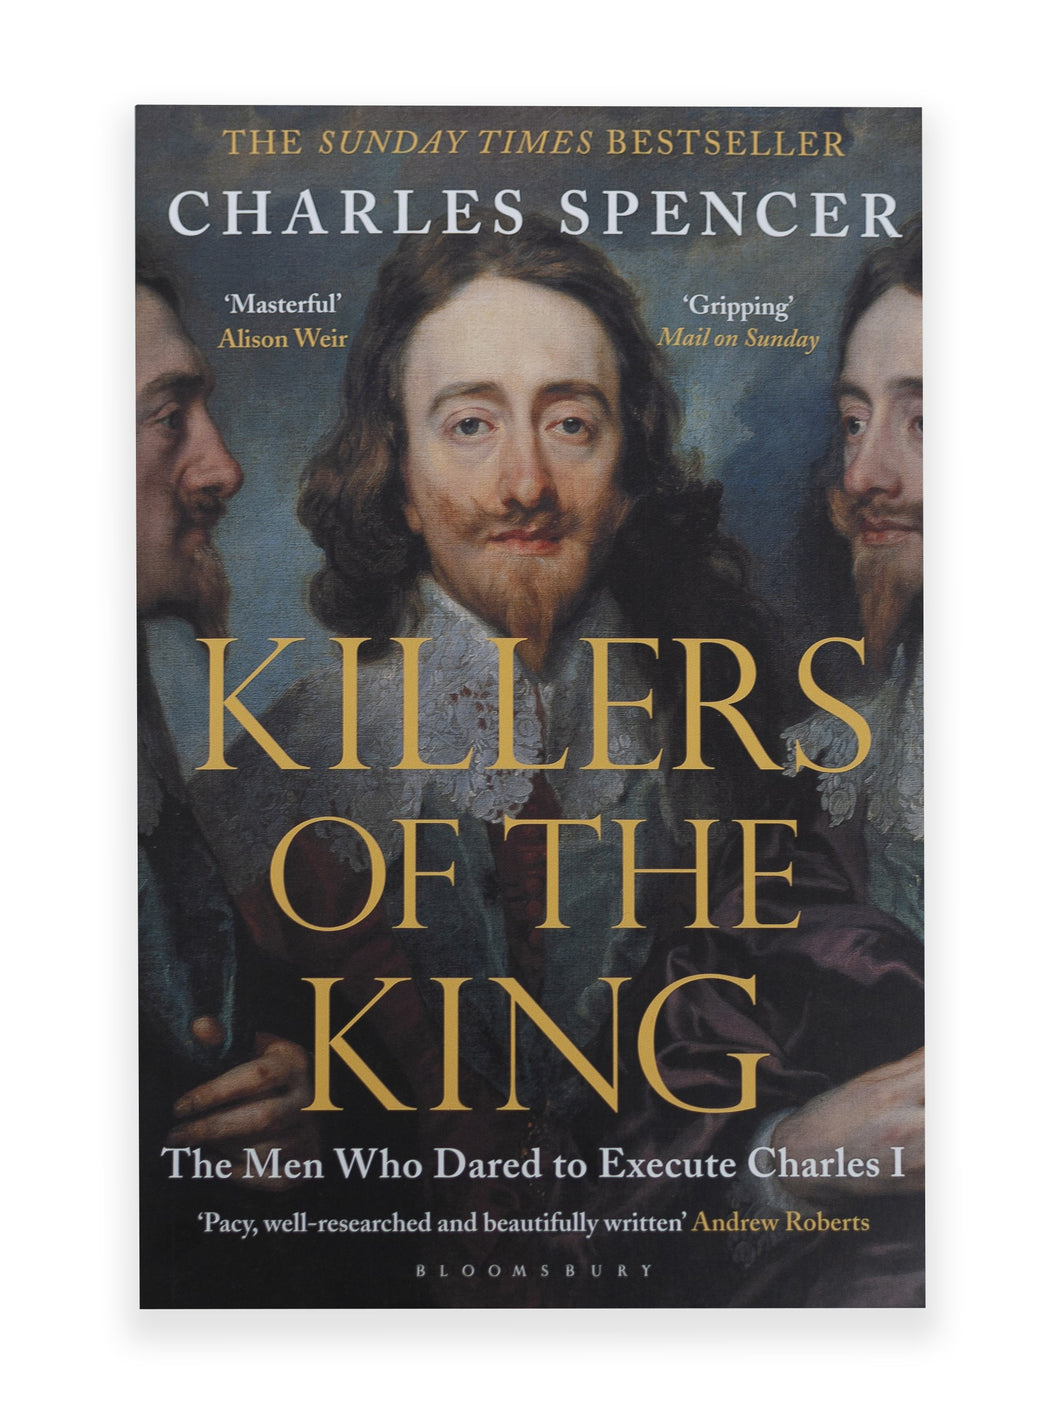 Charles Spencer - Killers of the King, book cover from the Harley Gallery online shop